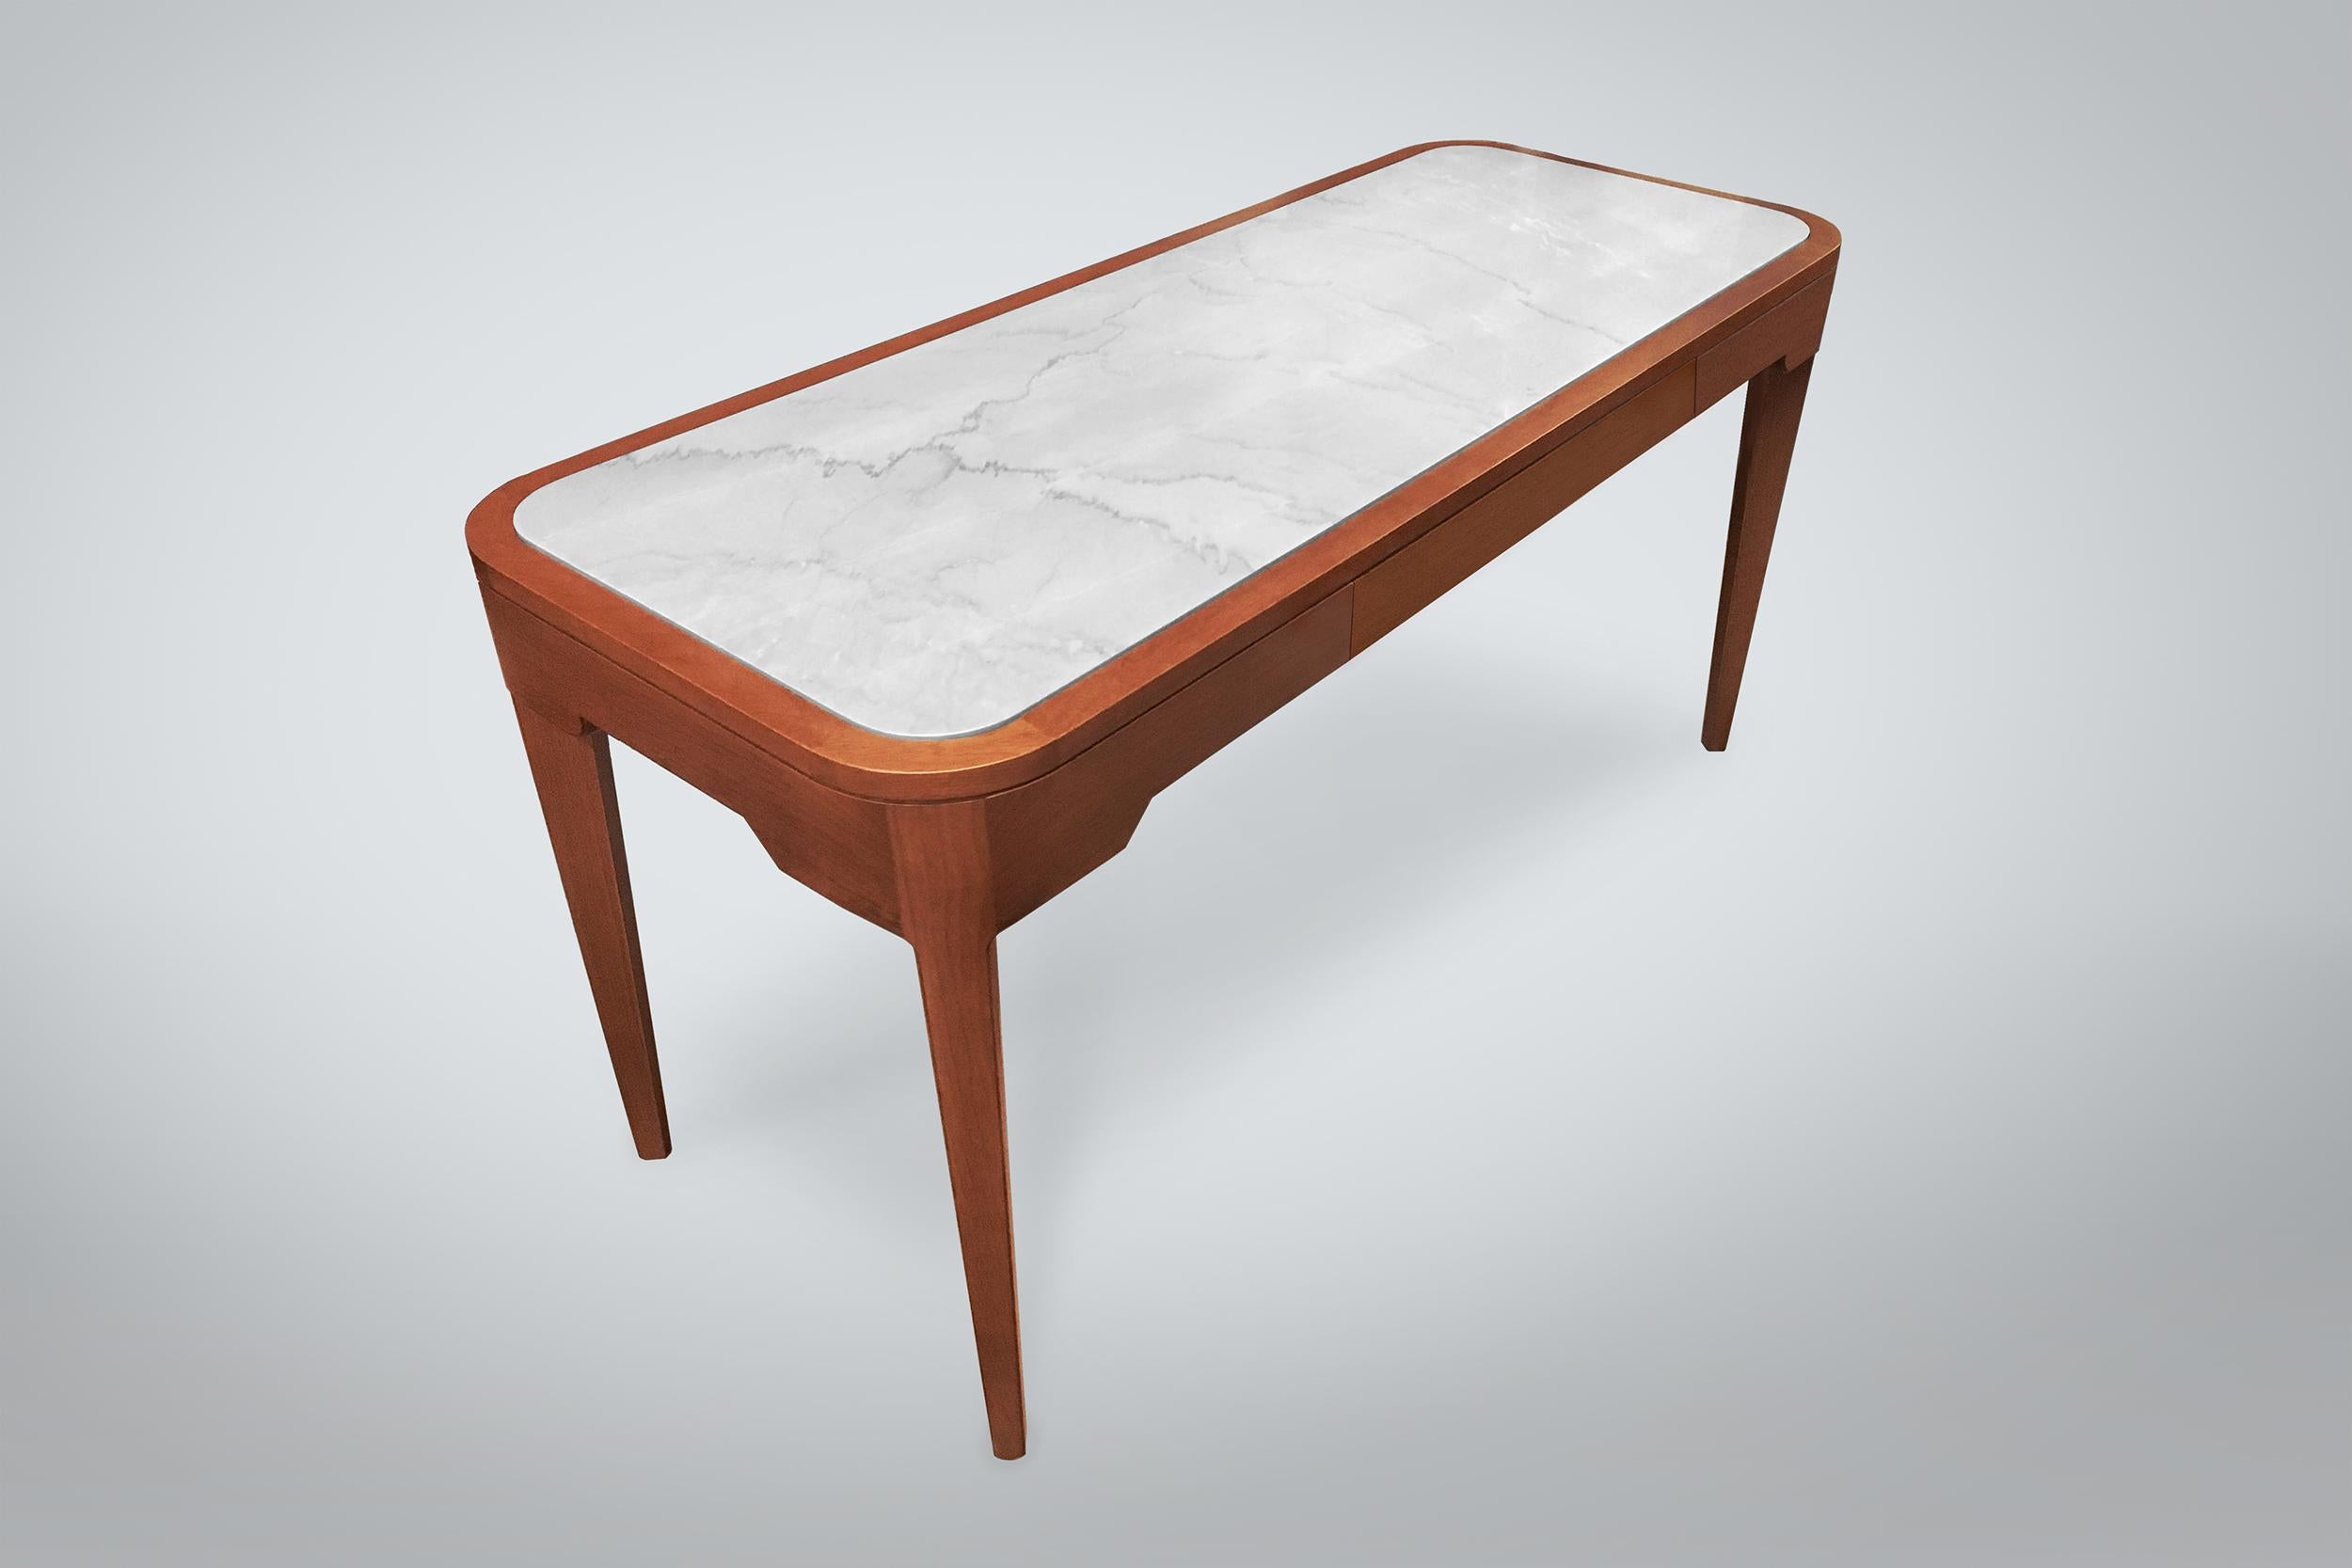 Our Eileen writing desk shown in walnut with palissandro stone inset (COM).

All of our pieces are made to order with custom sizes available upon request. Additional options include but are not limited to wood species, finish, and hardware. Inset